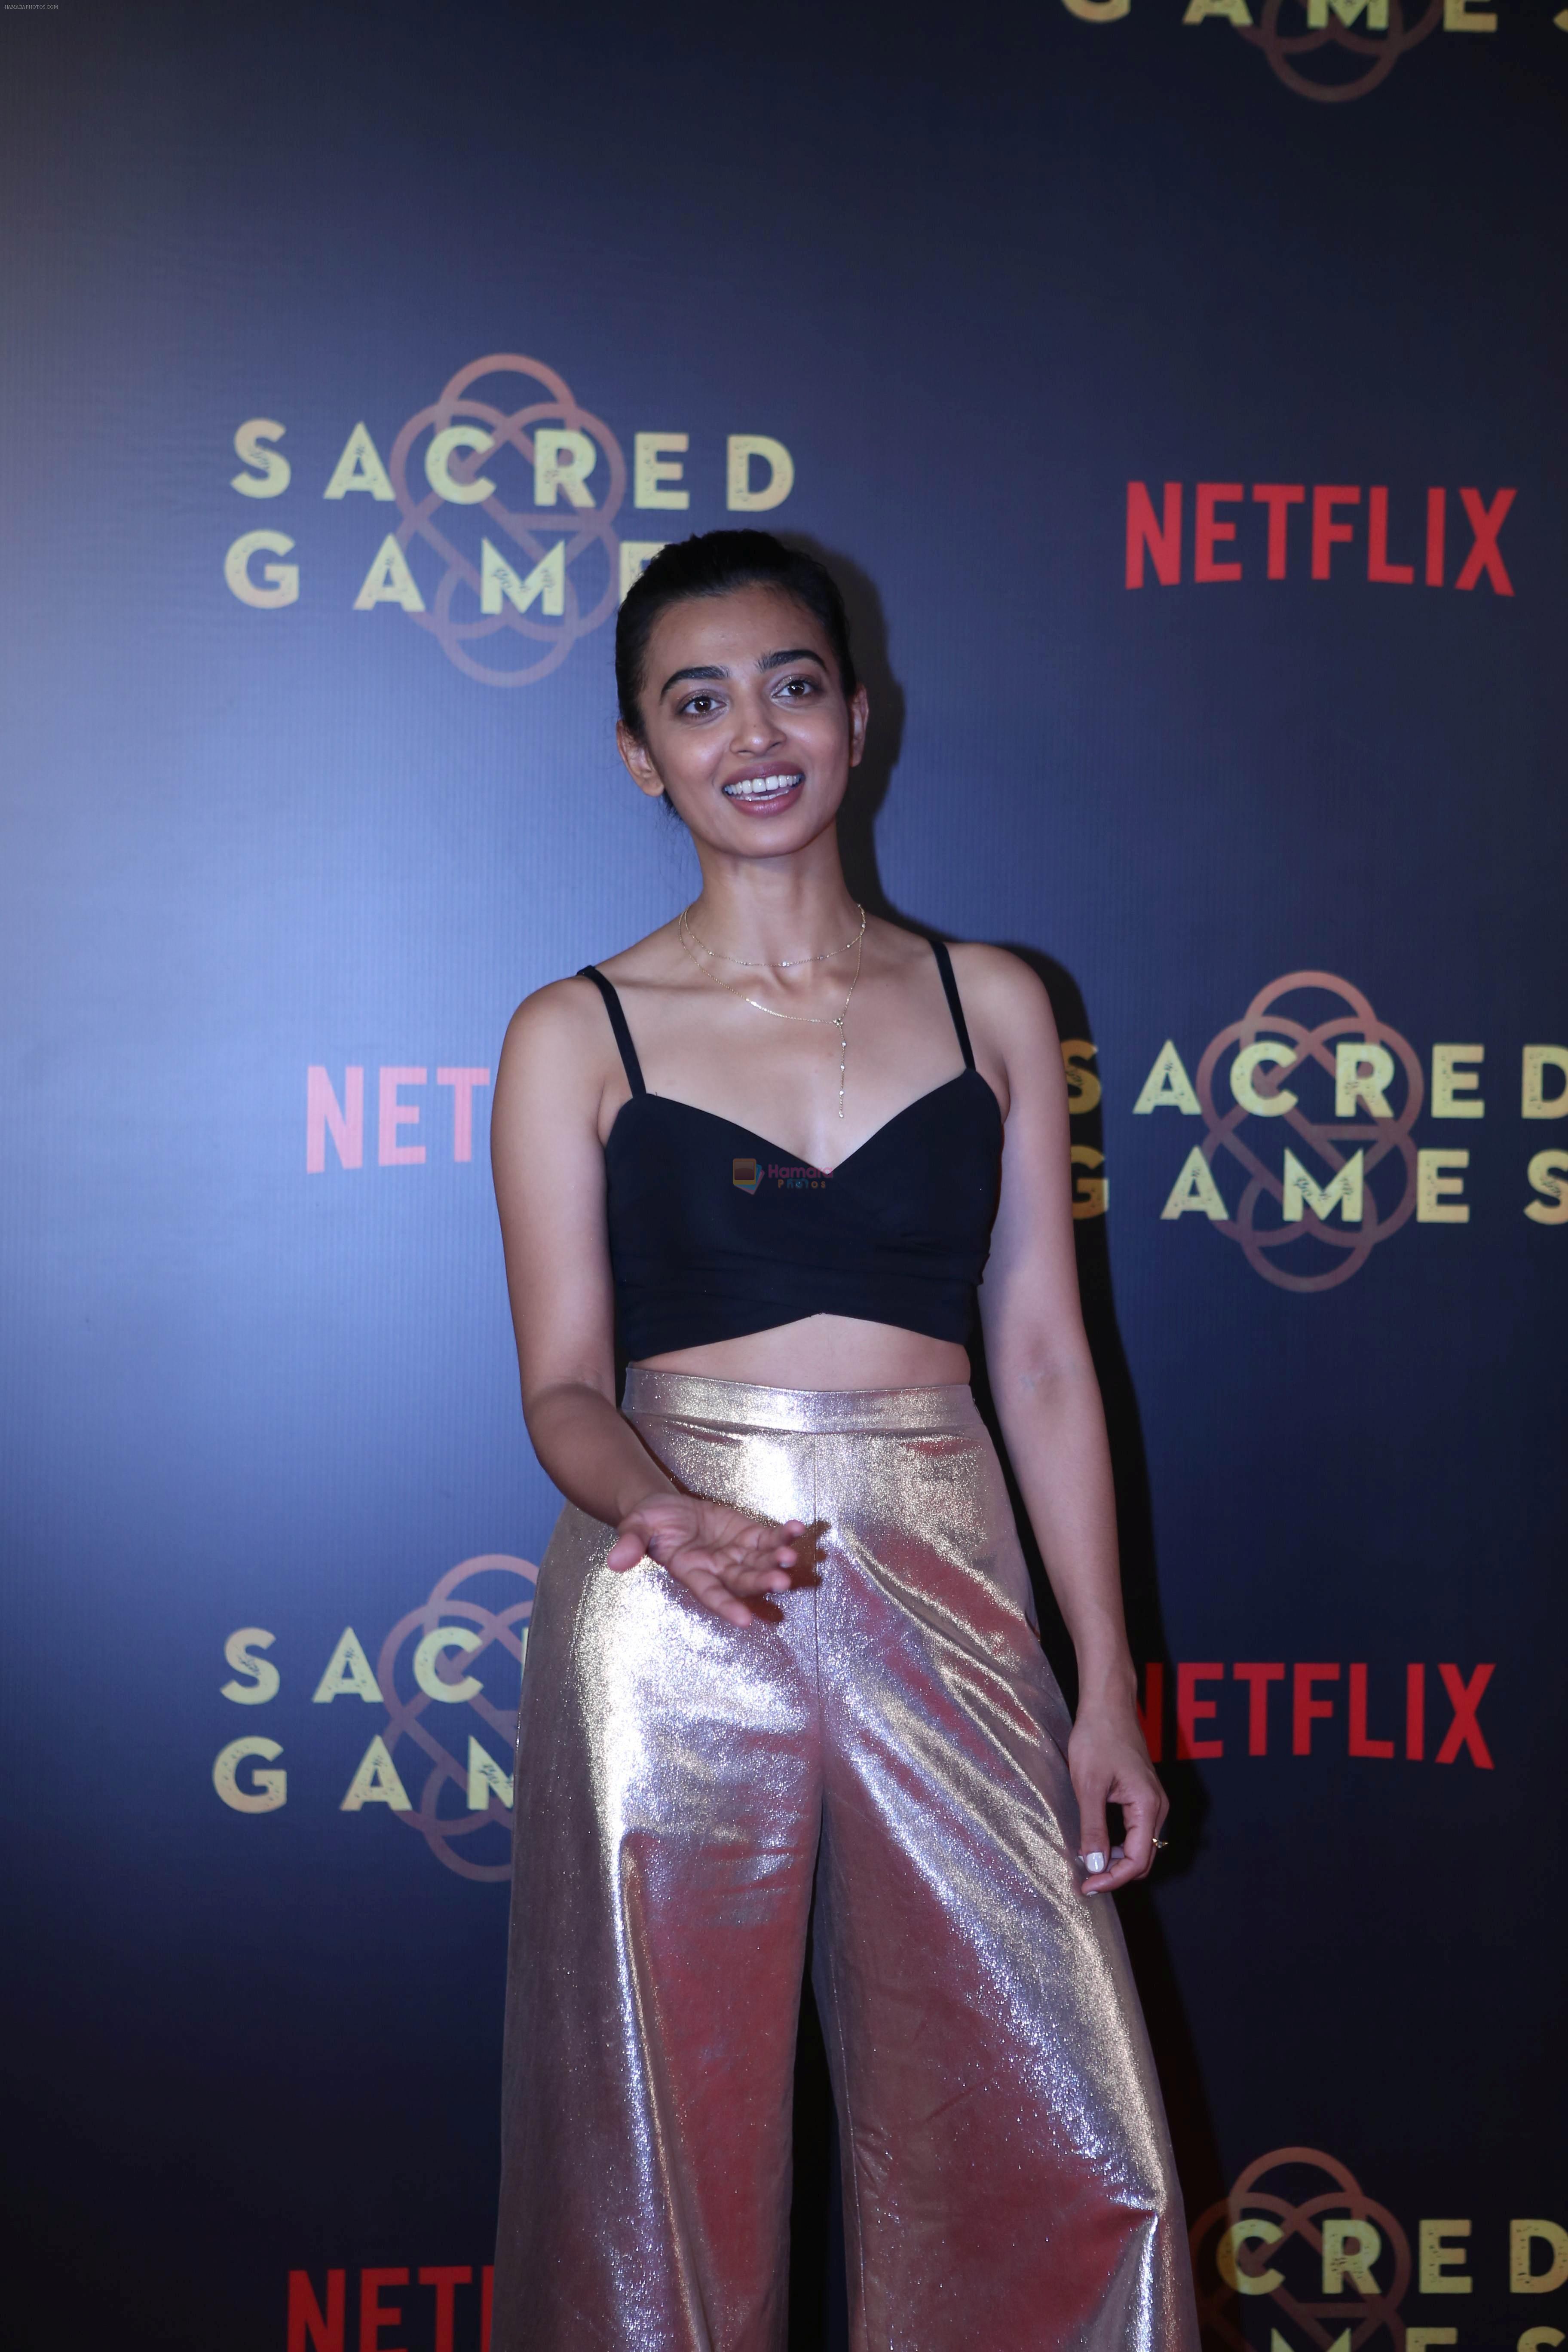 Radhika Apte at the Screening of Netflix Sacred Games in pvr icon Andheri on 28th June 2018